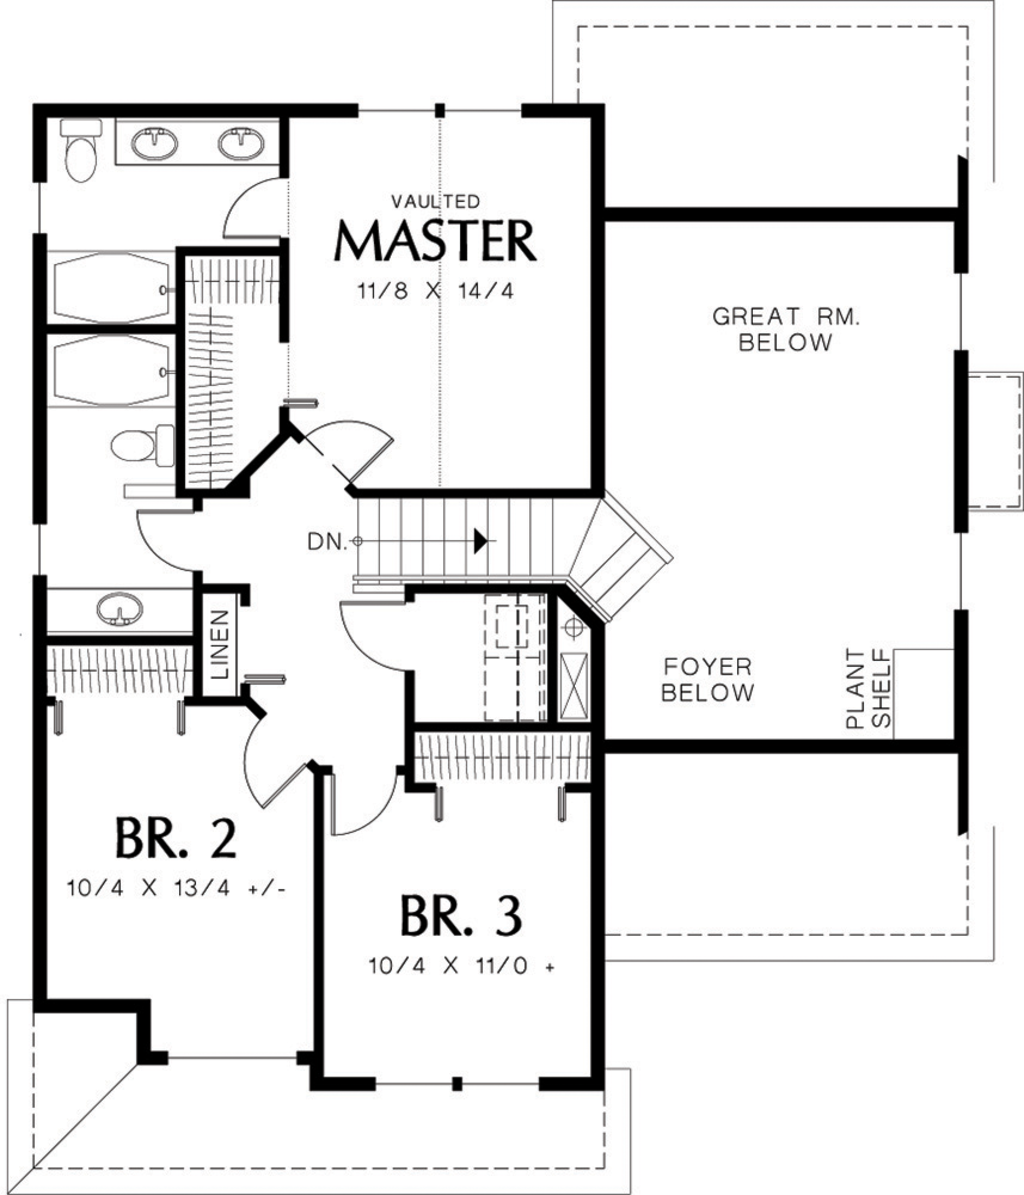 15 House Plan For 1500 Sq Ft, Best House Plans For 1500 Square Feet